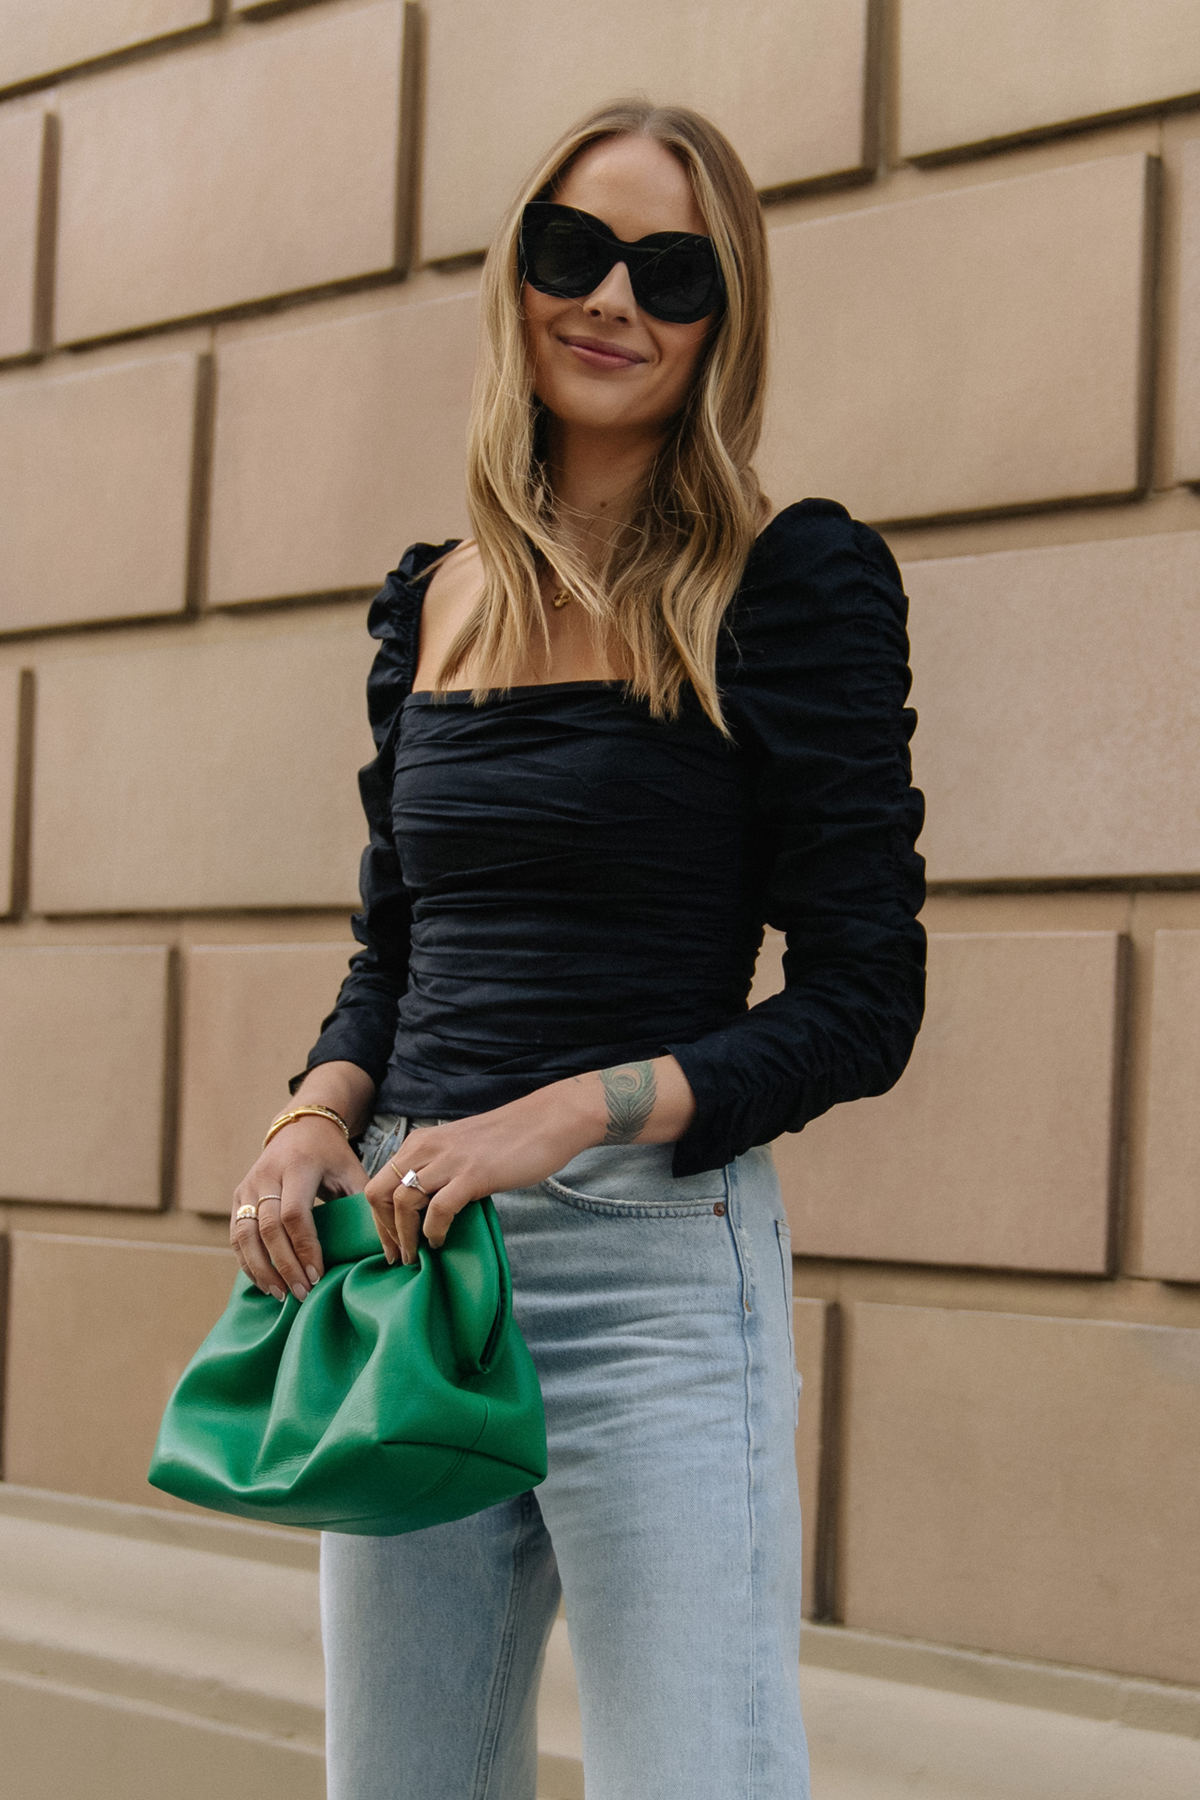 Fashion Jackson Wearing Black Rouched Reformation Top Green Clutch Light Wash Jeans